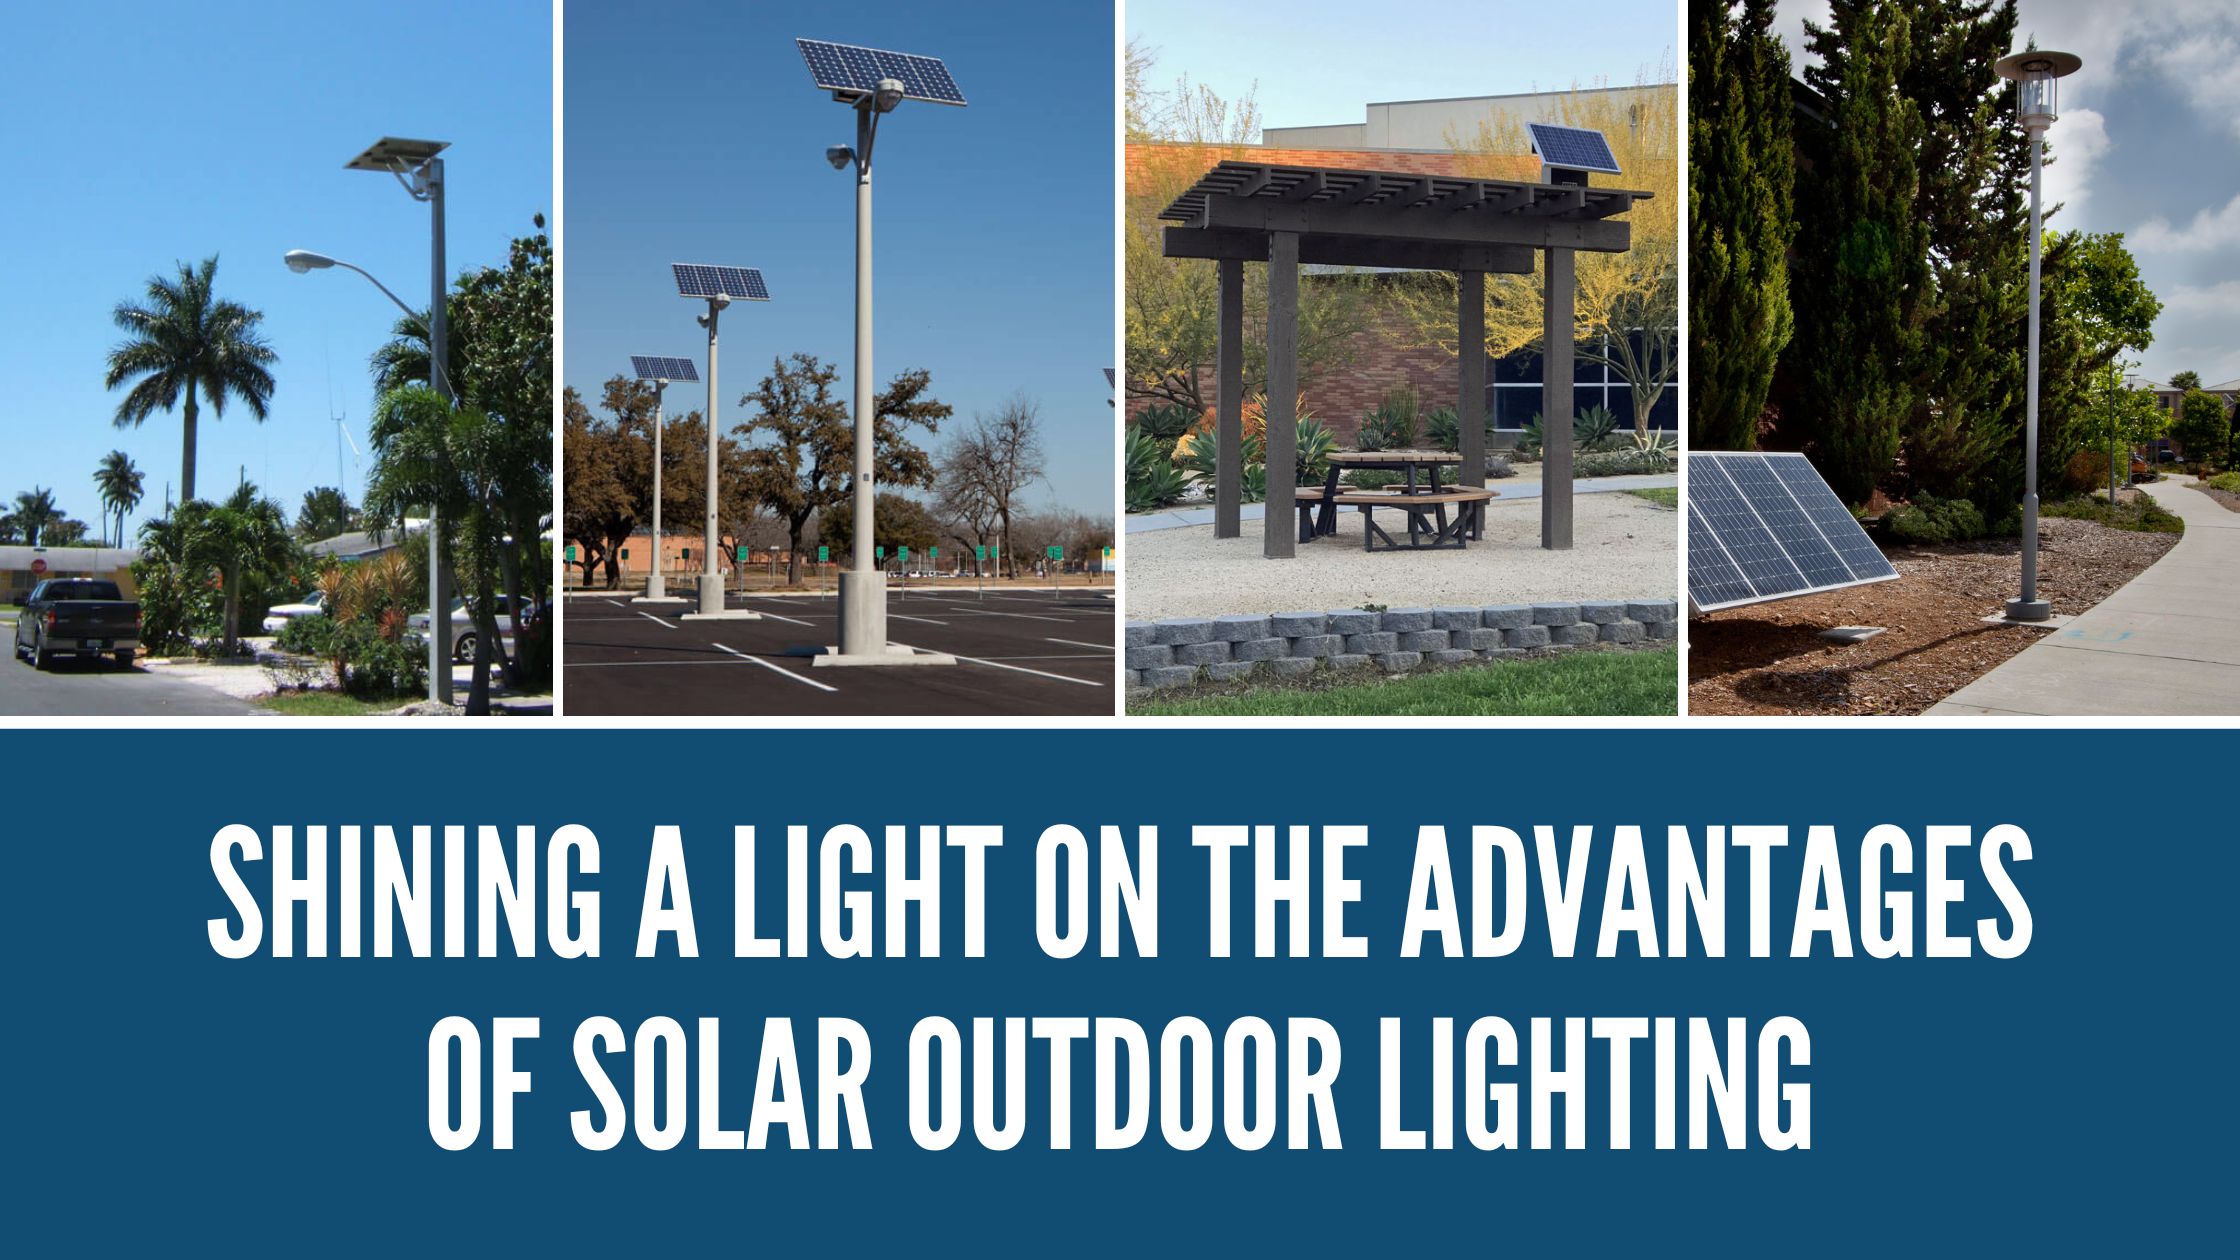 Shining a Light on the Advantages of Solar Outdoor Lighting